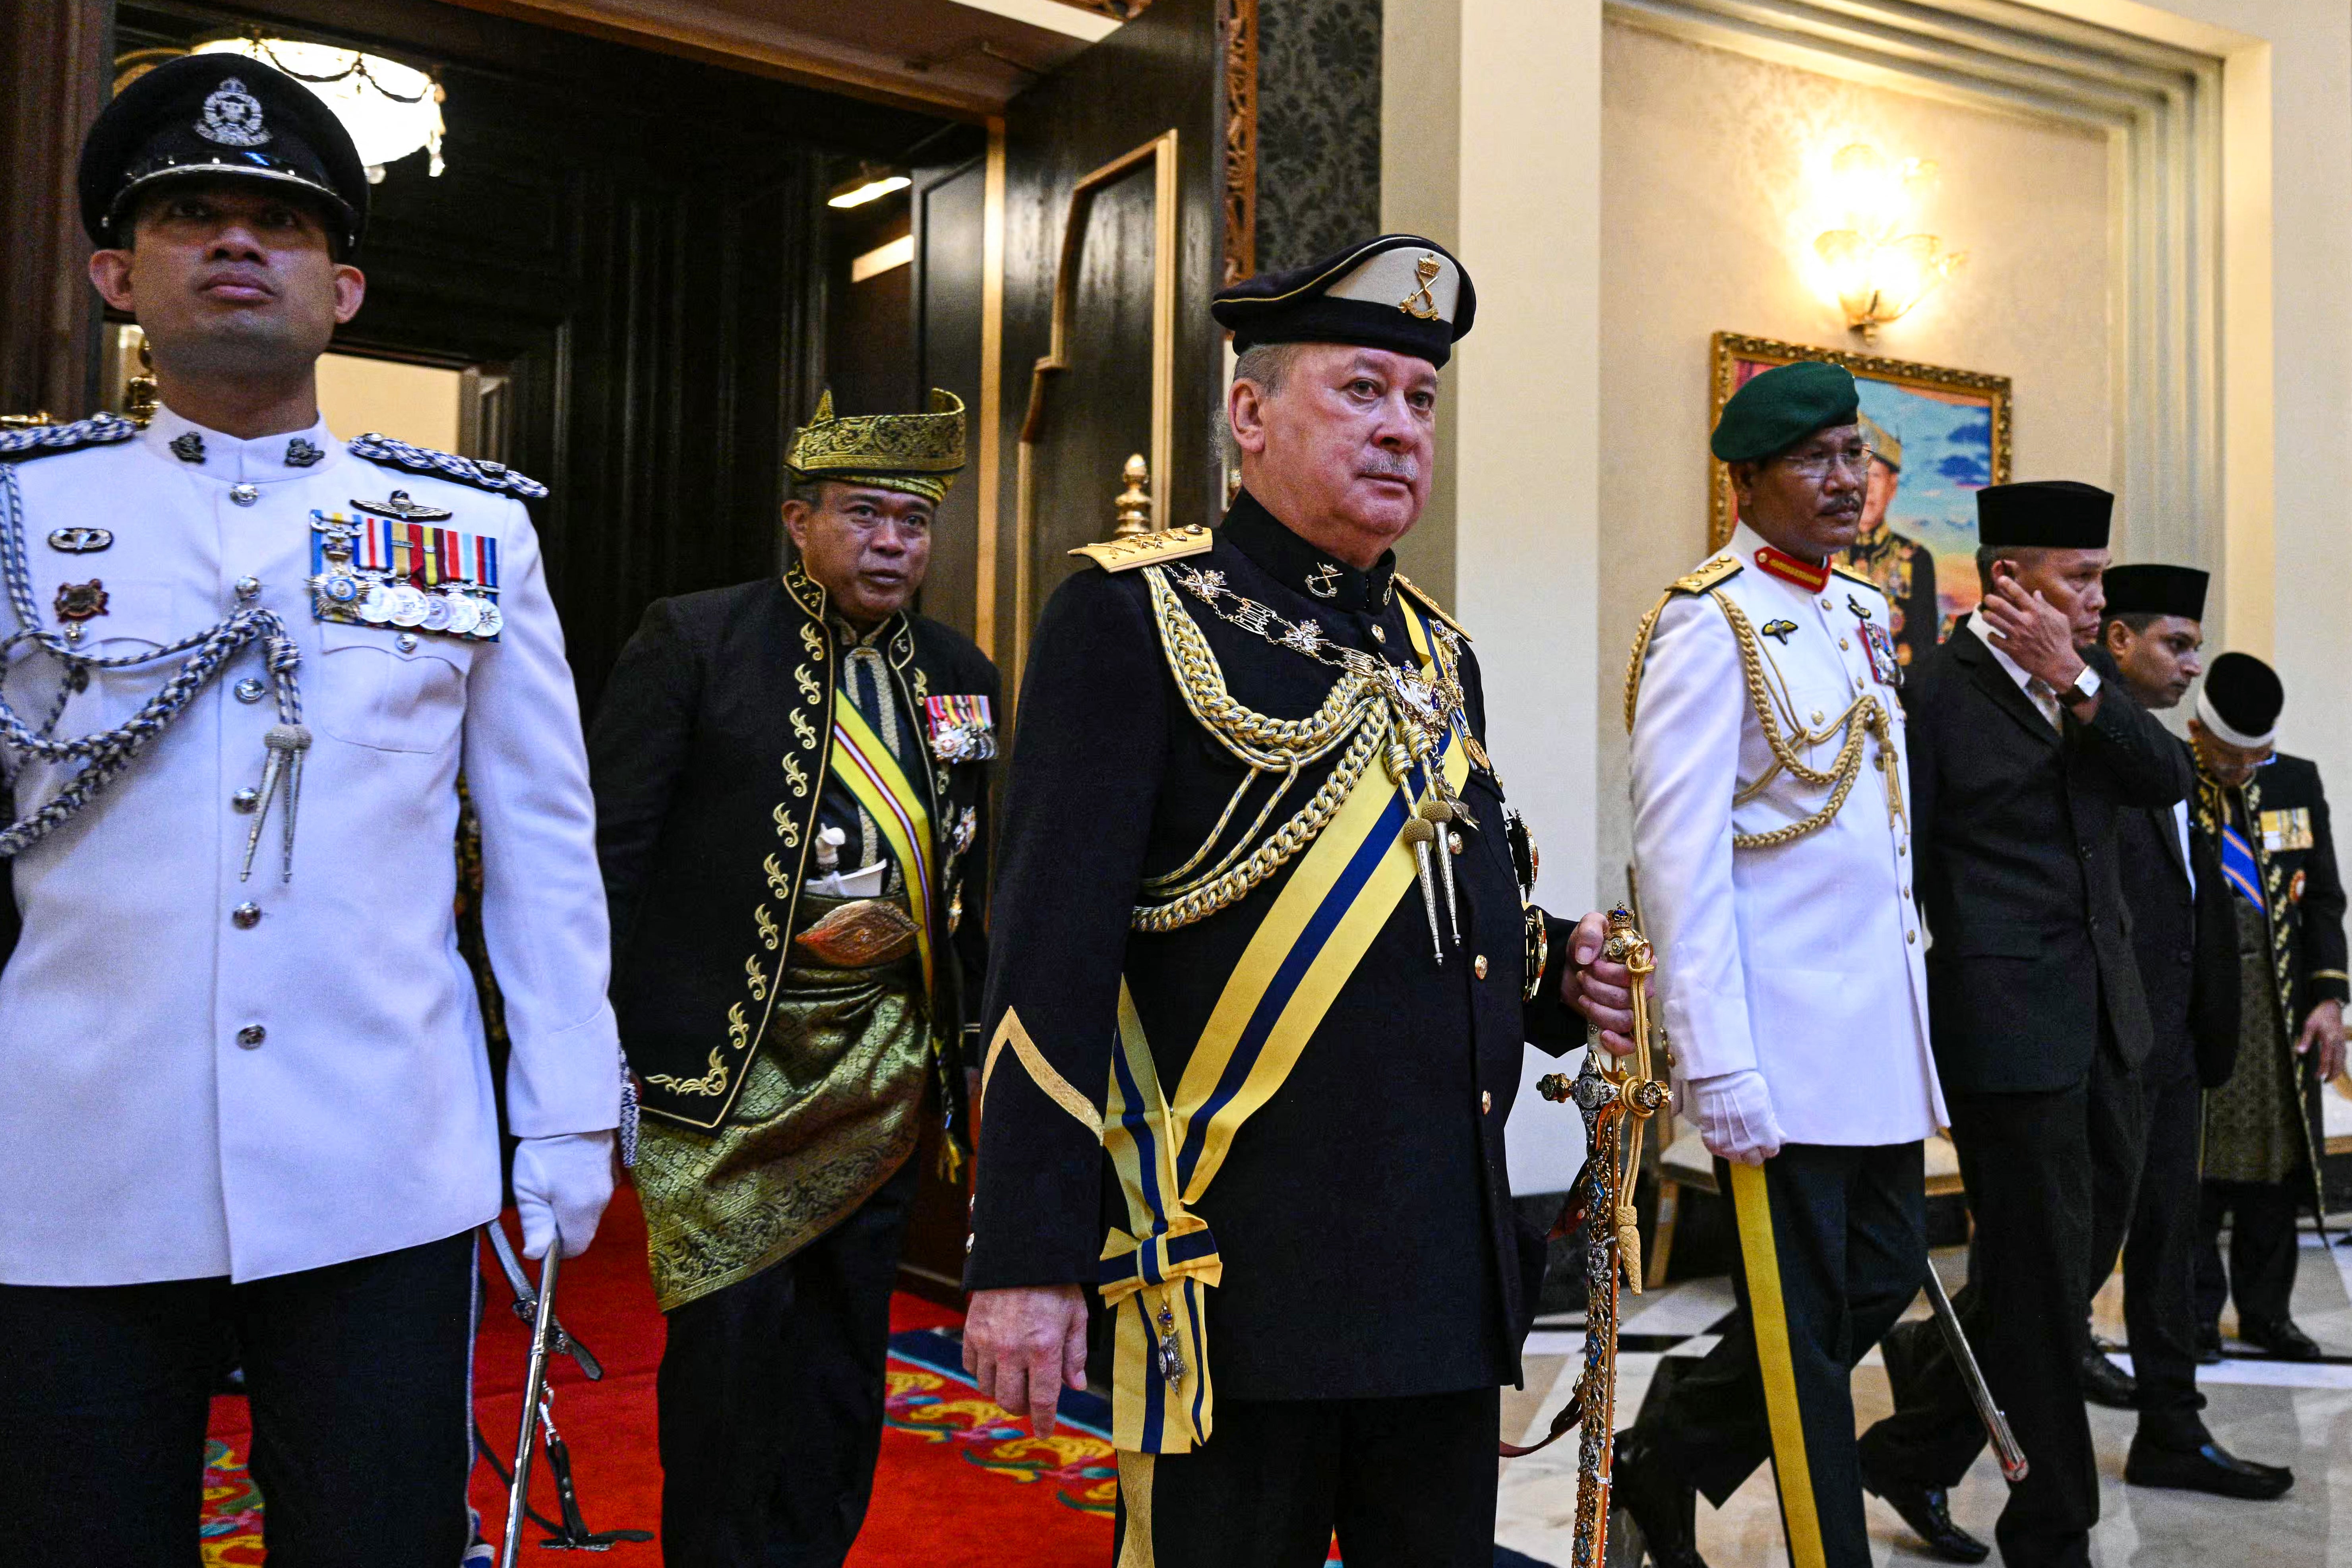 Sultan Ibrahim succeeds Al-Sultan Abdullah Sultan Ahmad Shah, who is returning to lead his home state of Pahang after completing his five-year tenure as king